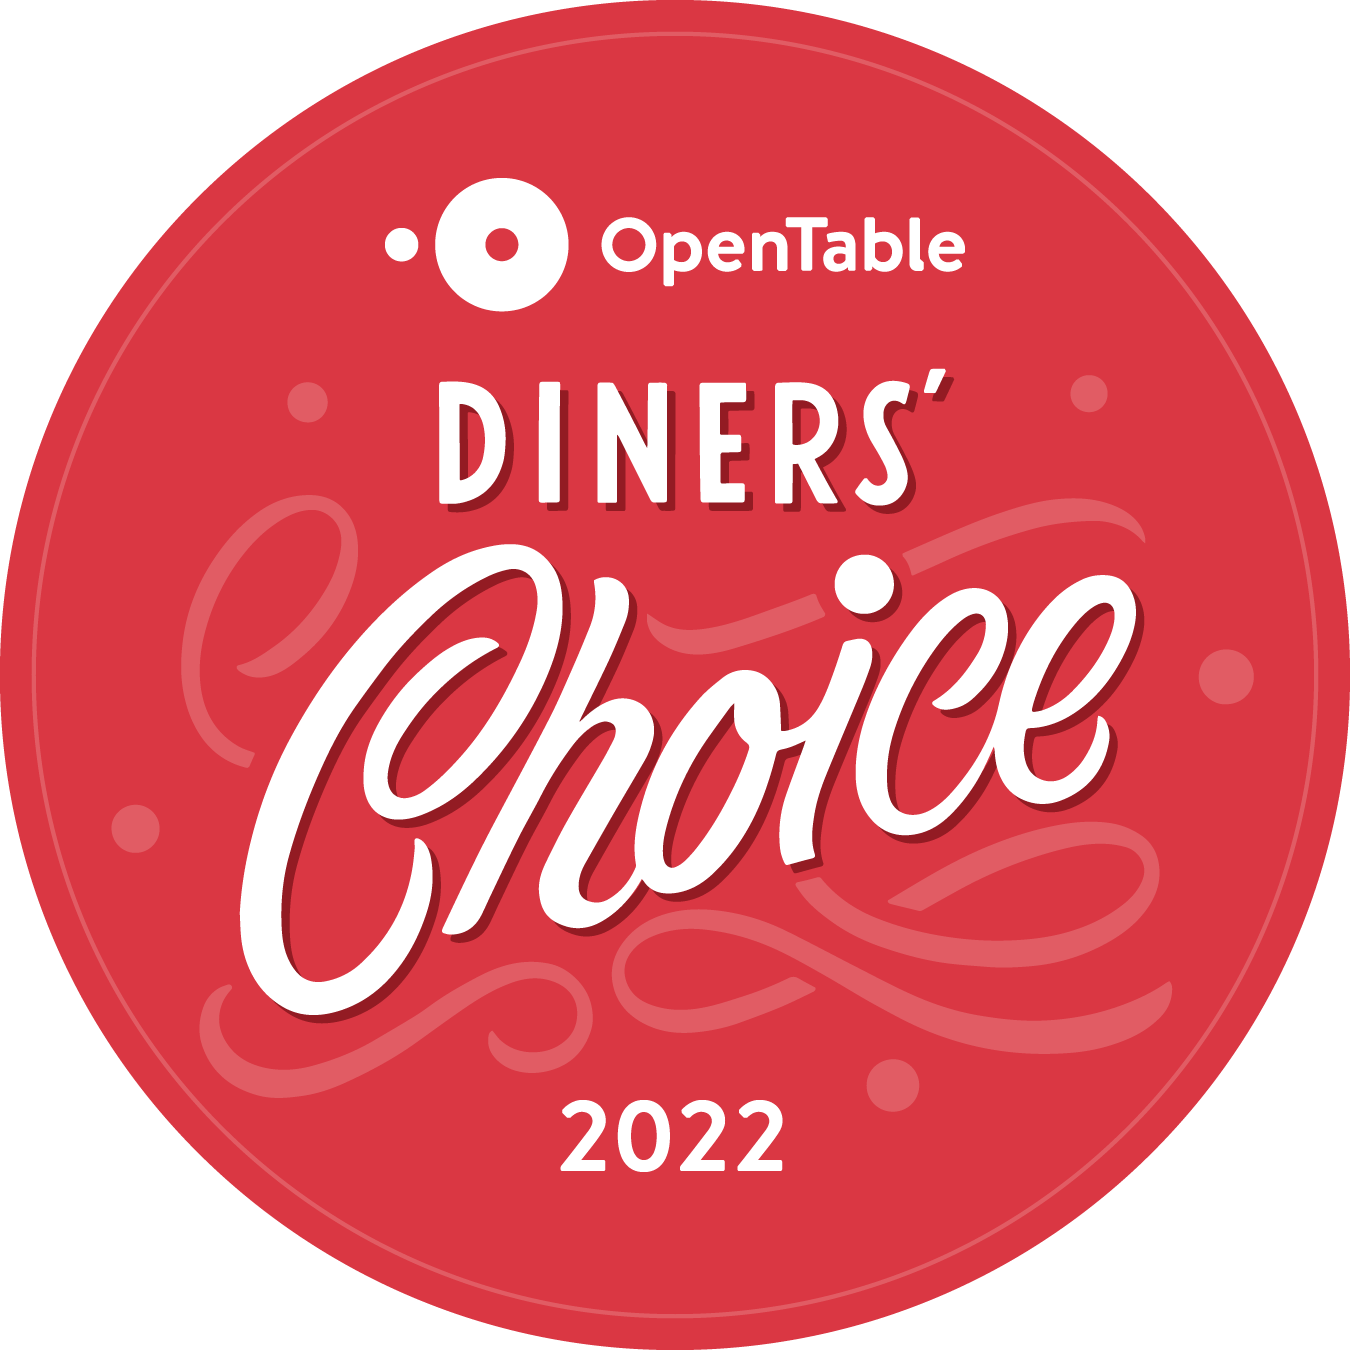 diners-choice-2022